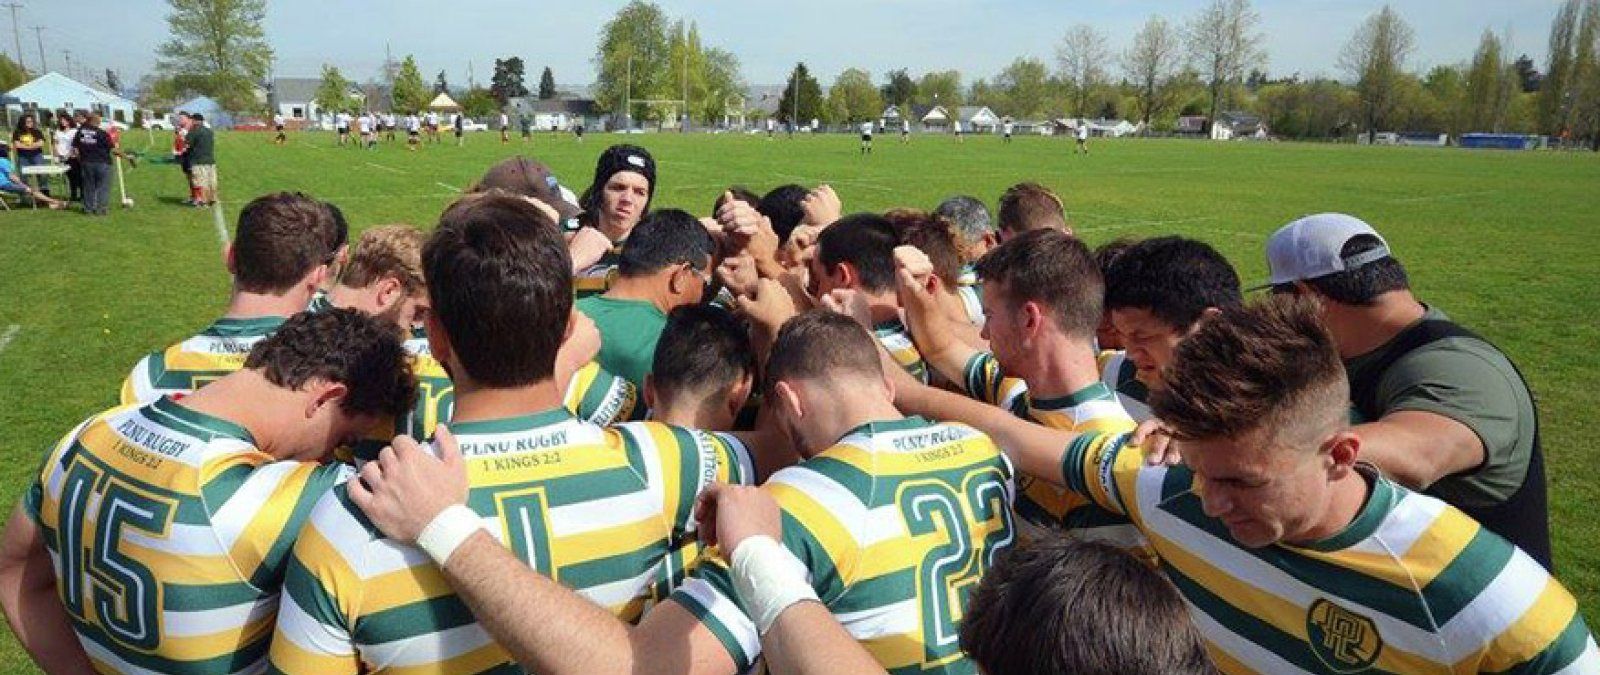 PLNU Rugby Club players gather in a huddle to pray before a match.